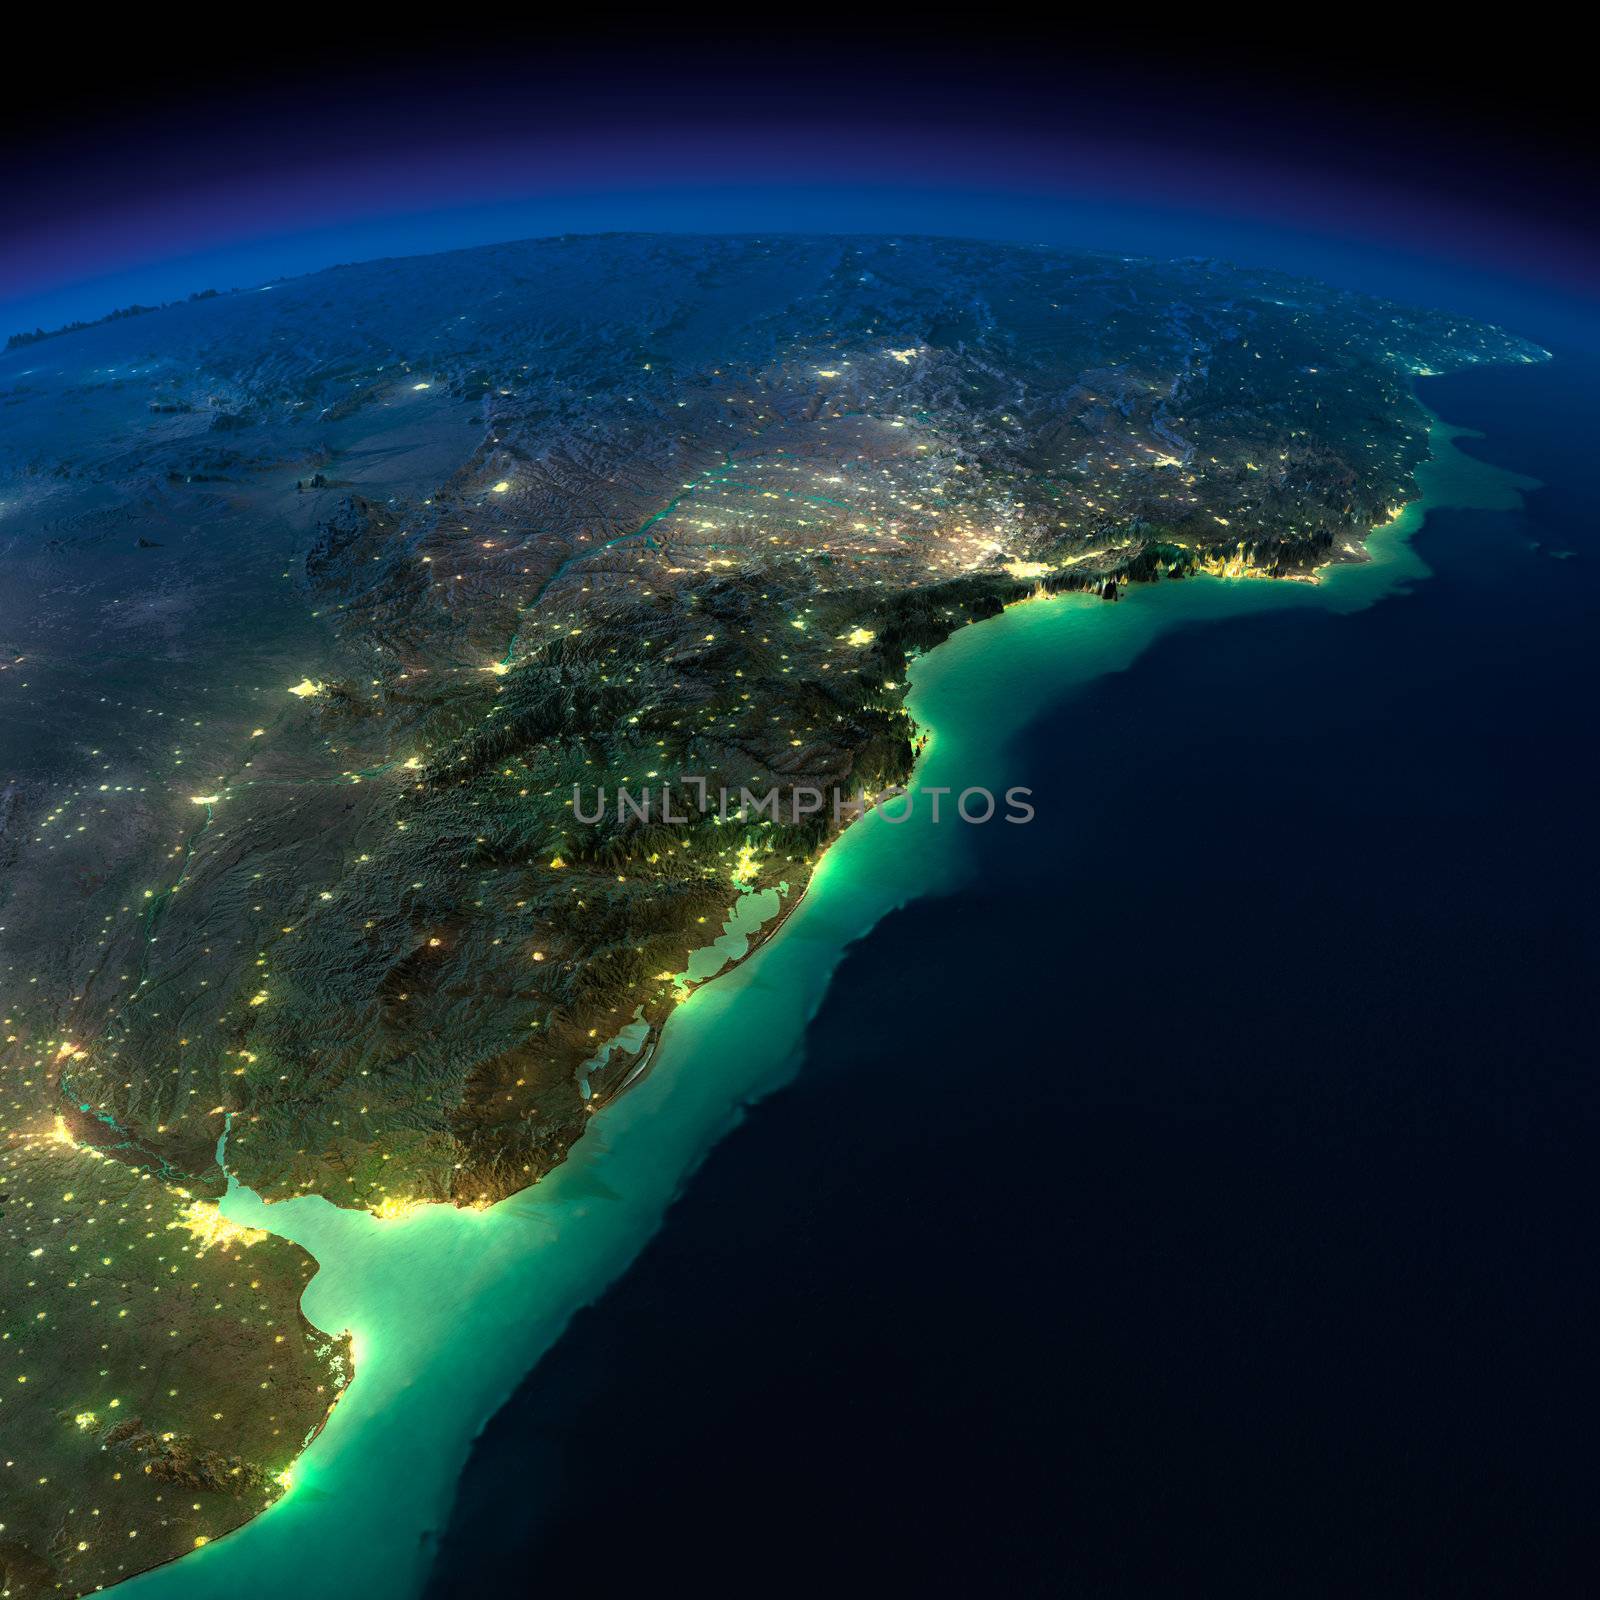 Night Earth. A piece of South America - Argentina and Brazil by Antartis